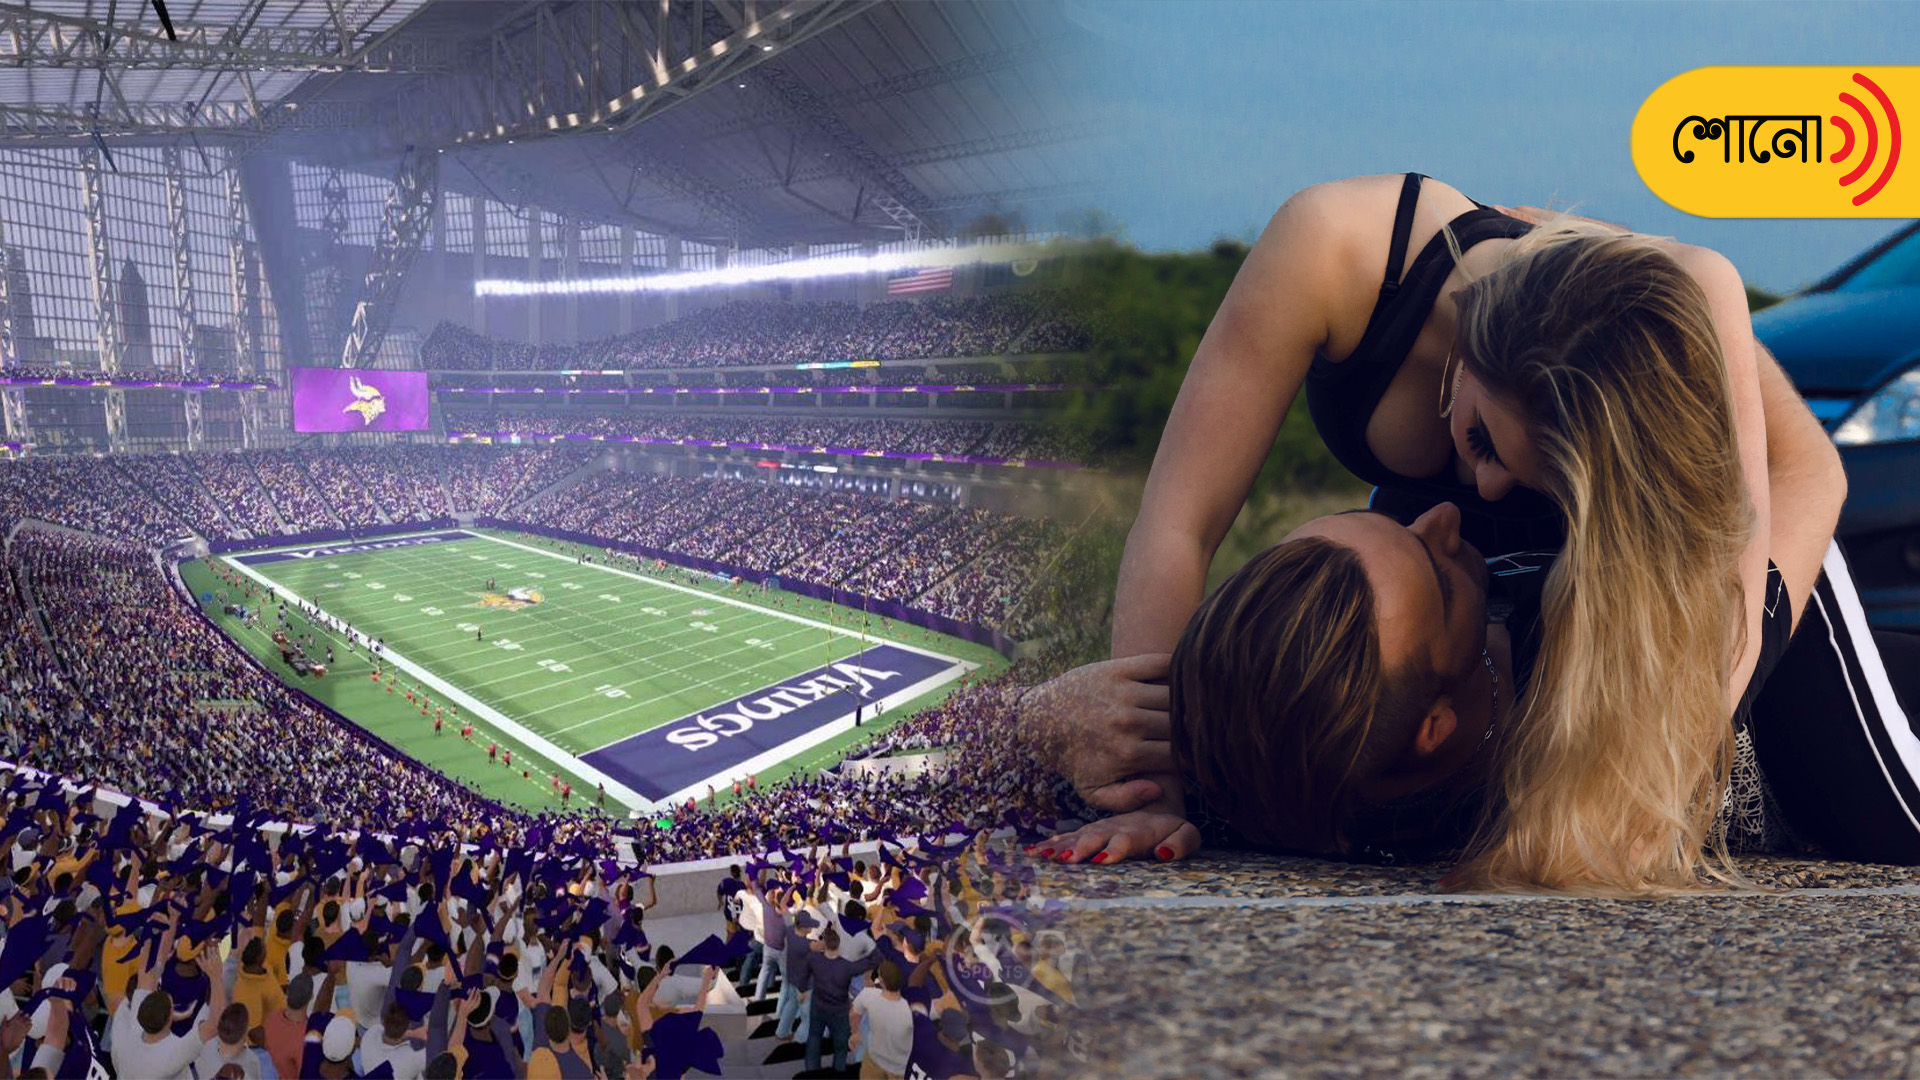 Couple bored at NFL match got intimate outside stadium